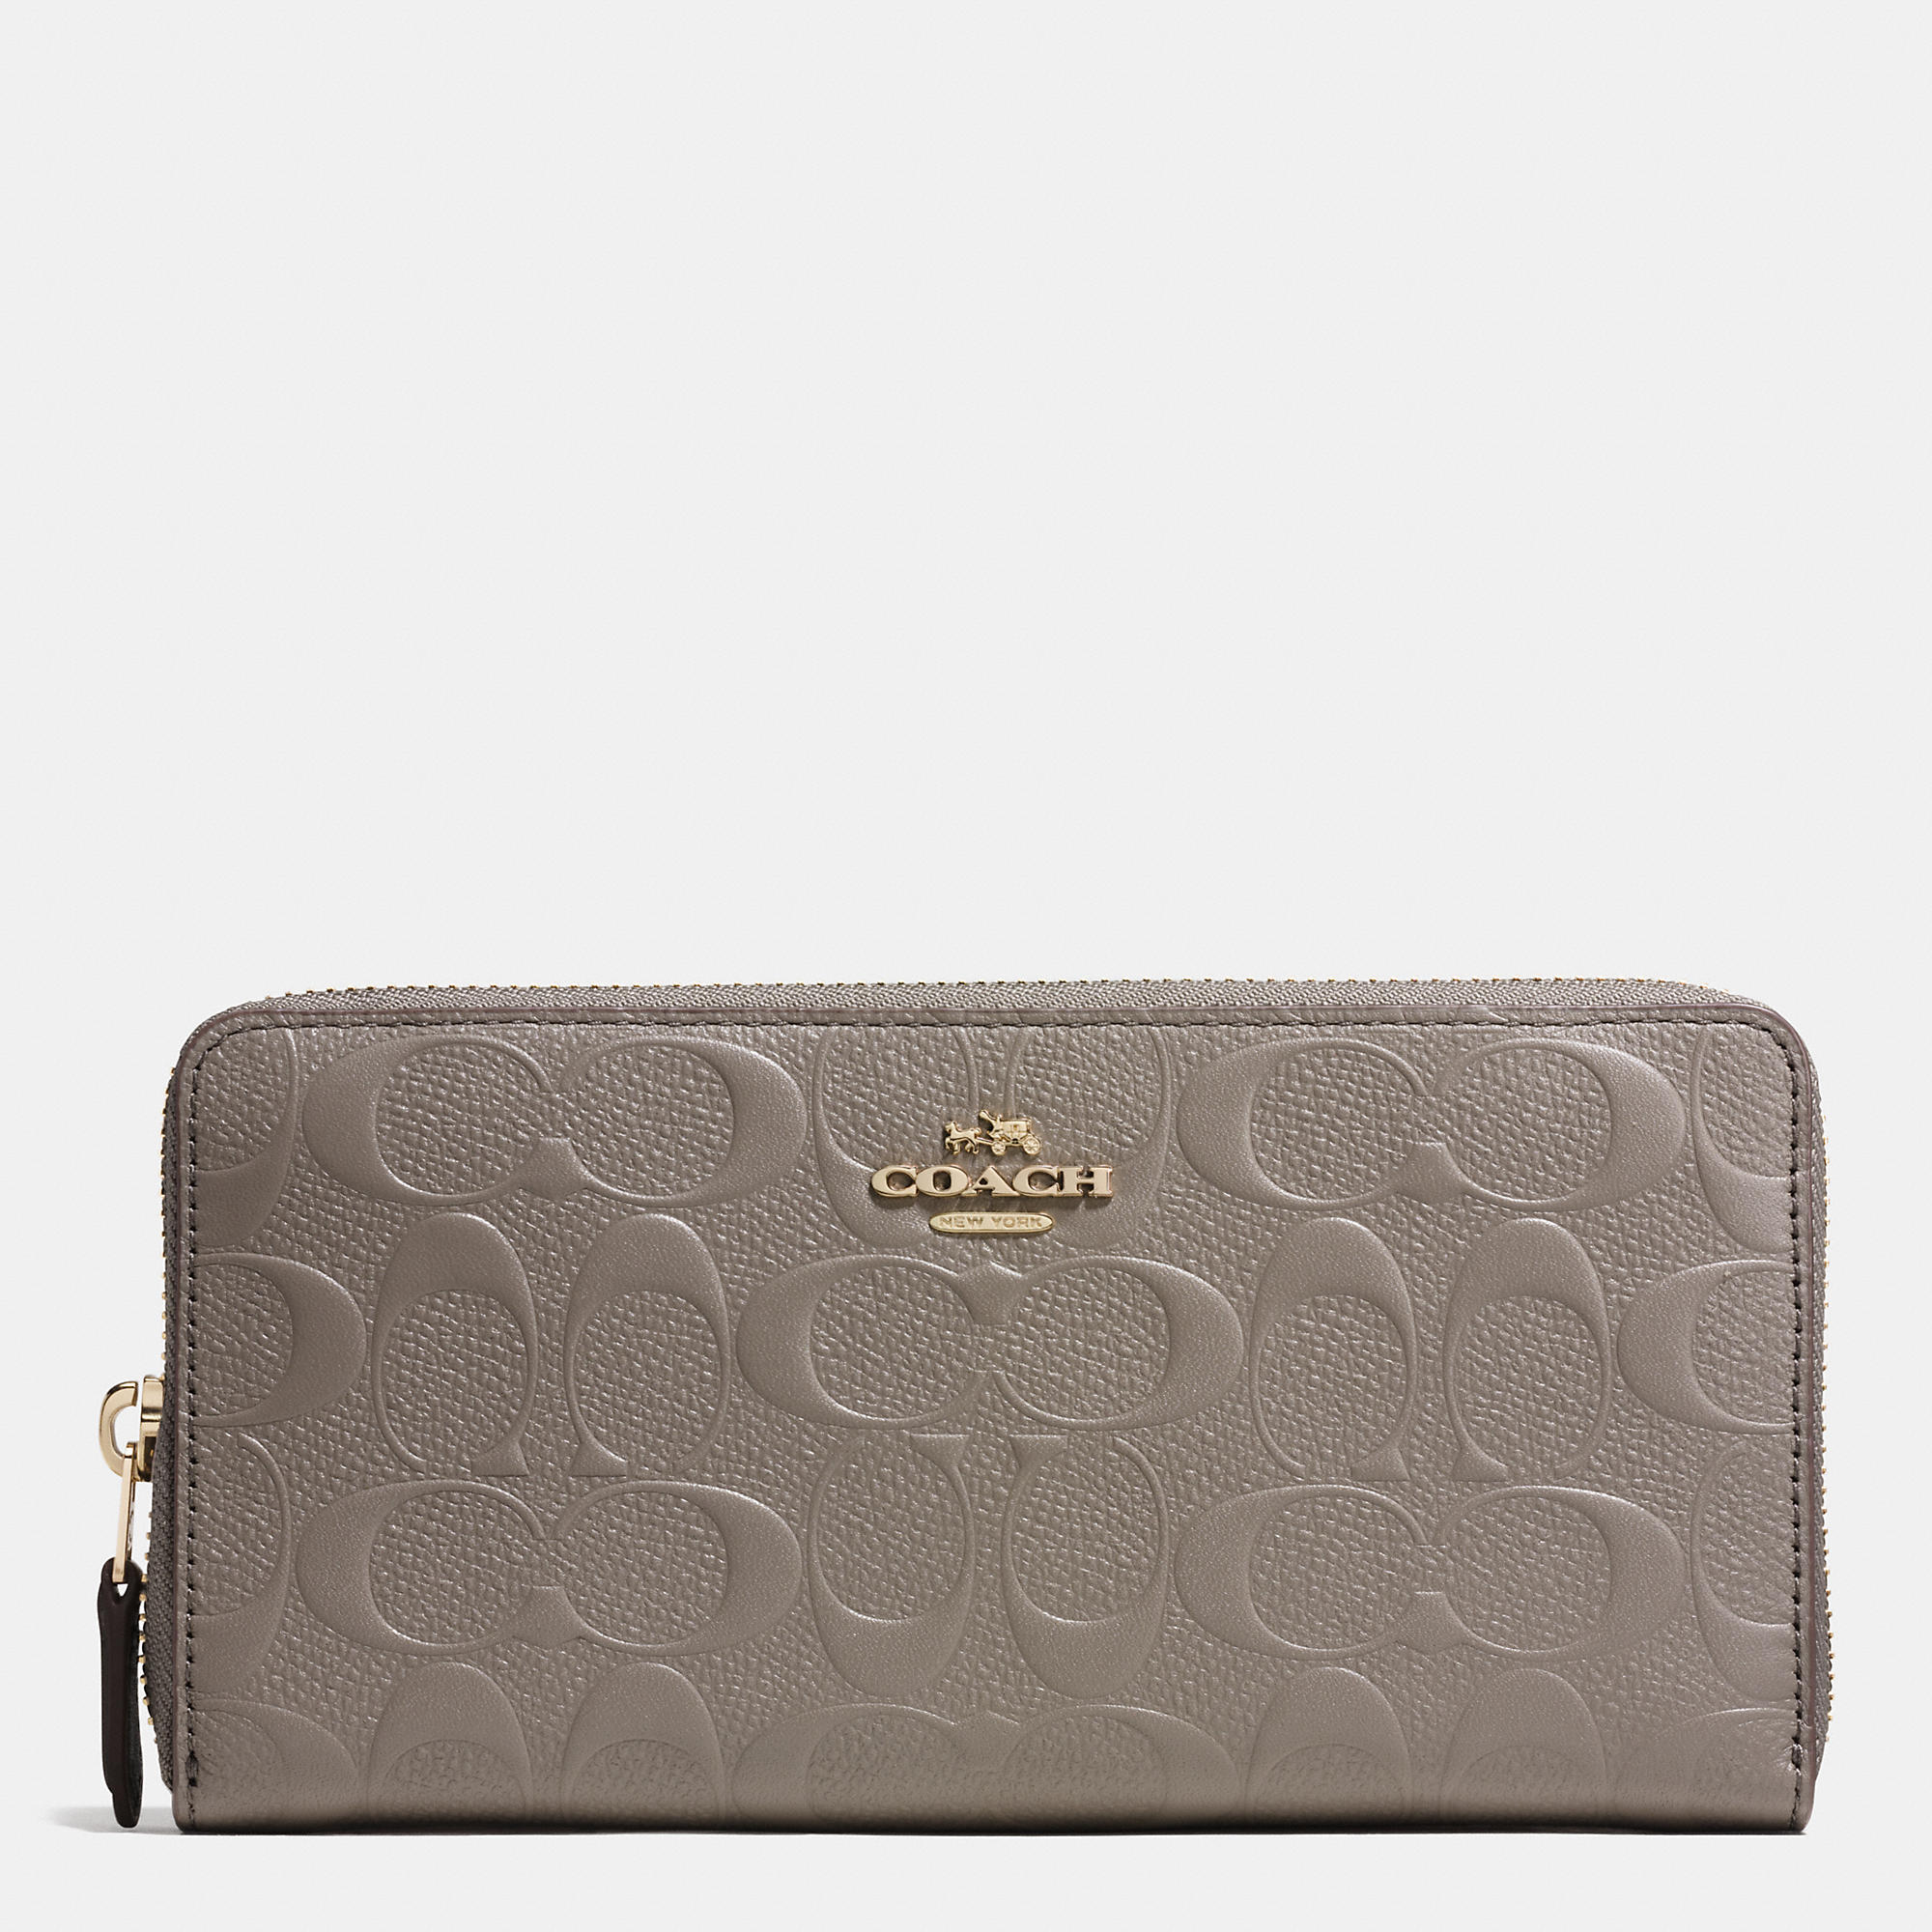 Famous Brand Coach Accordion Zip Wallet In Signature Embossed Leather | Women